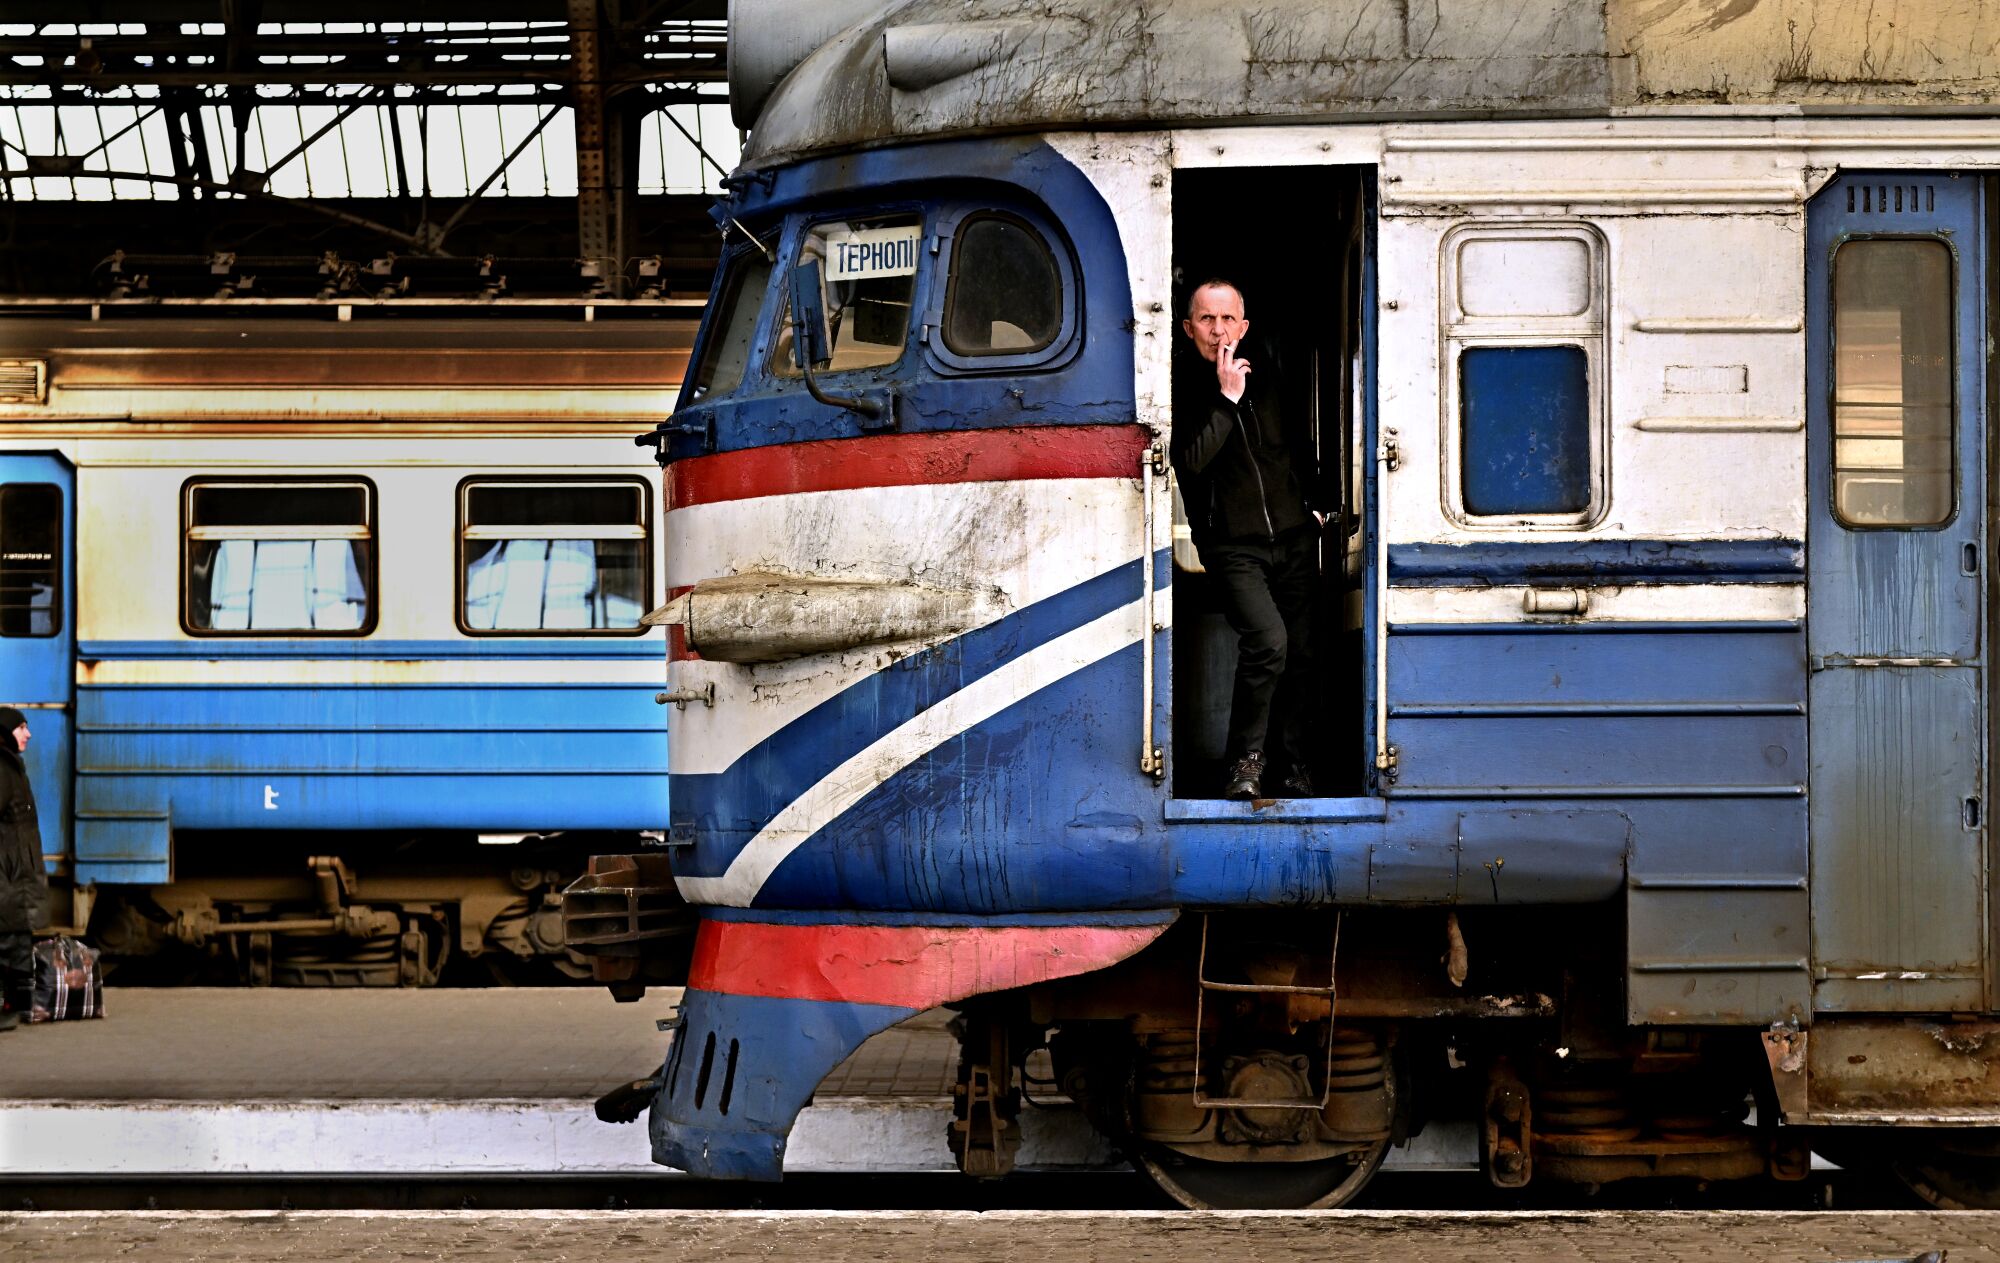 A train engineer takes a cigarette break in between before transporting people at the main station in Lviv, Ukraine.